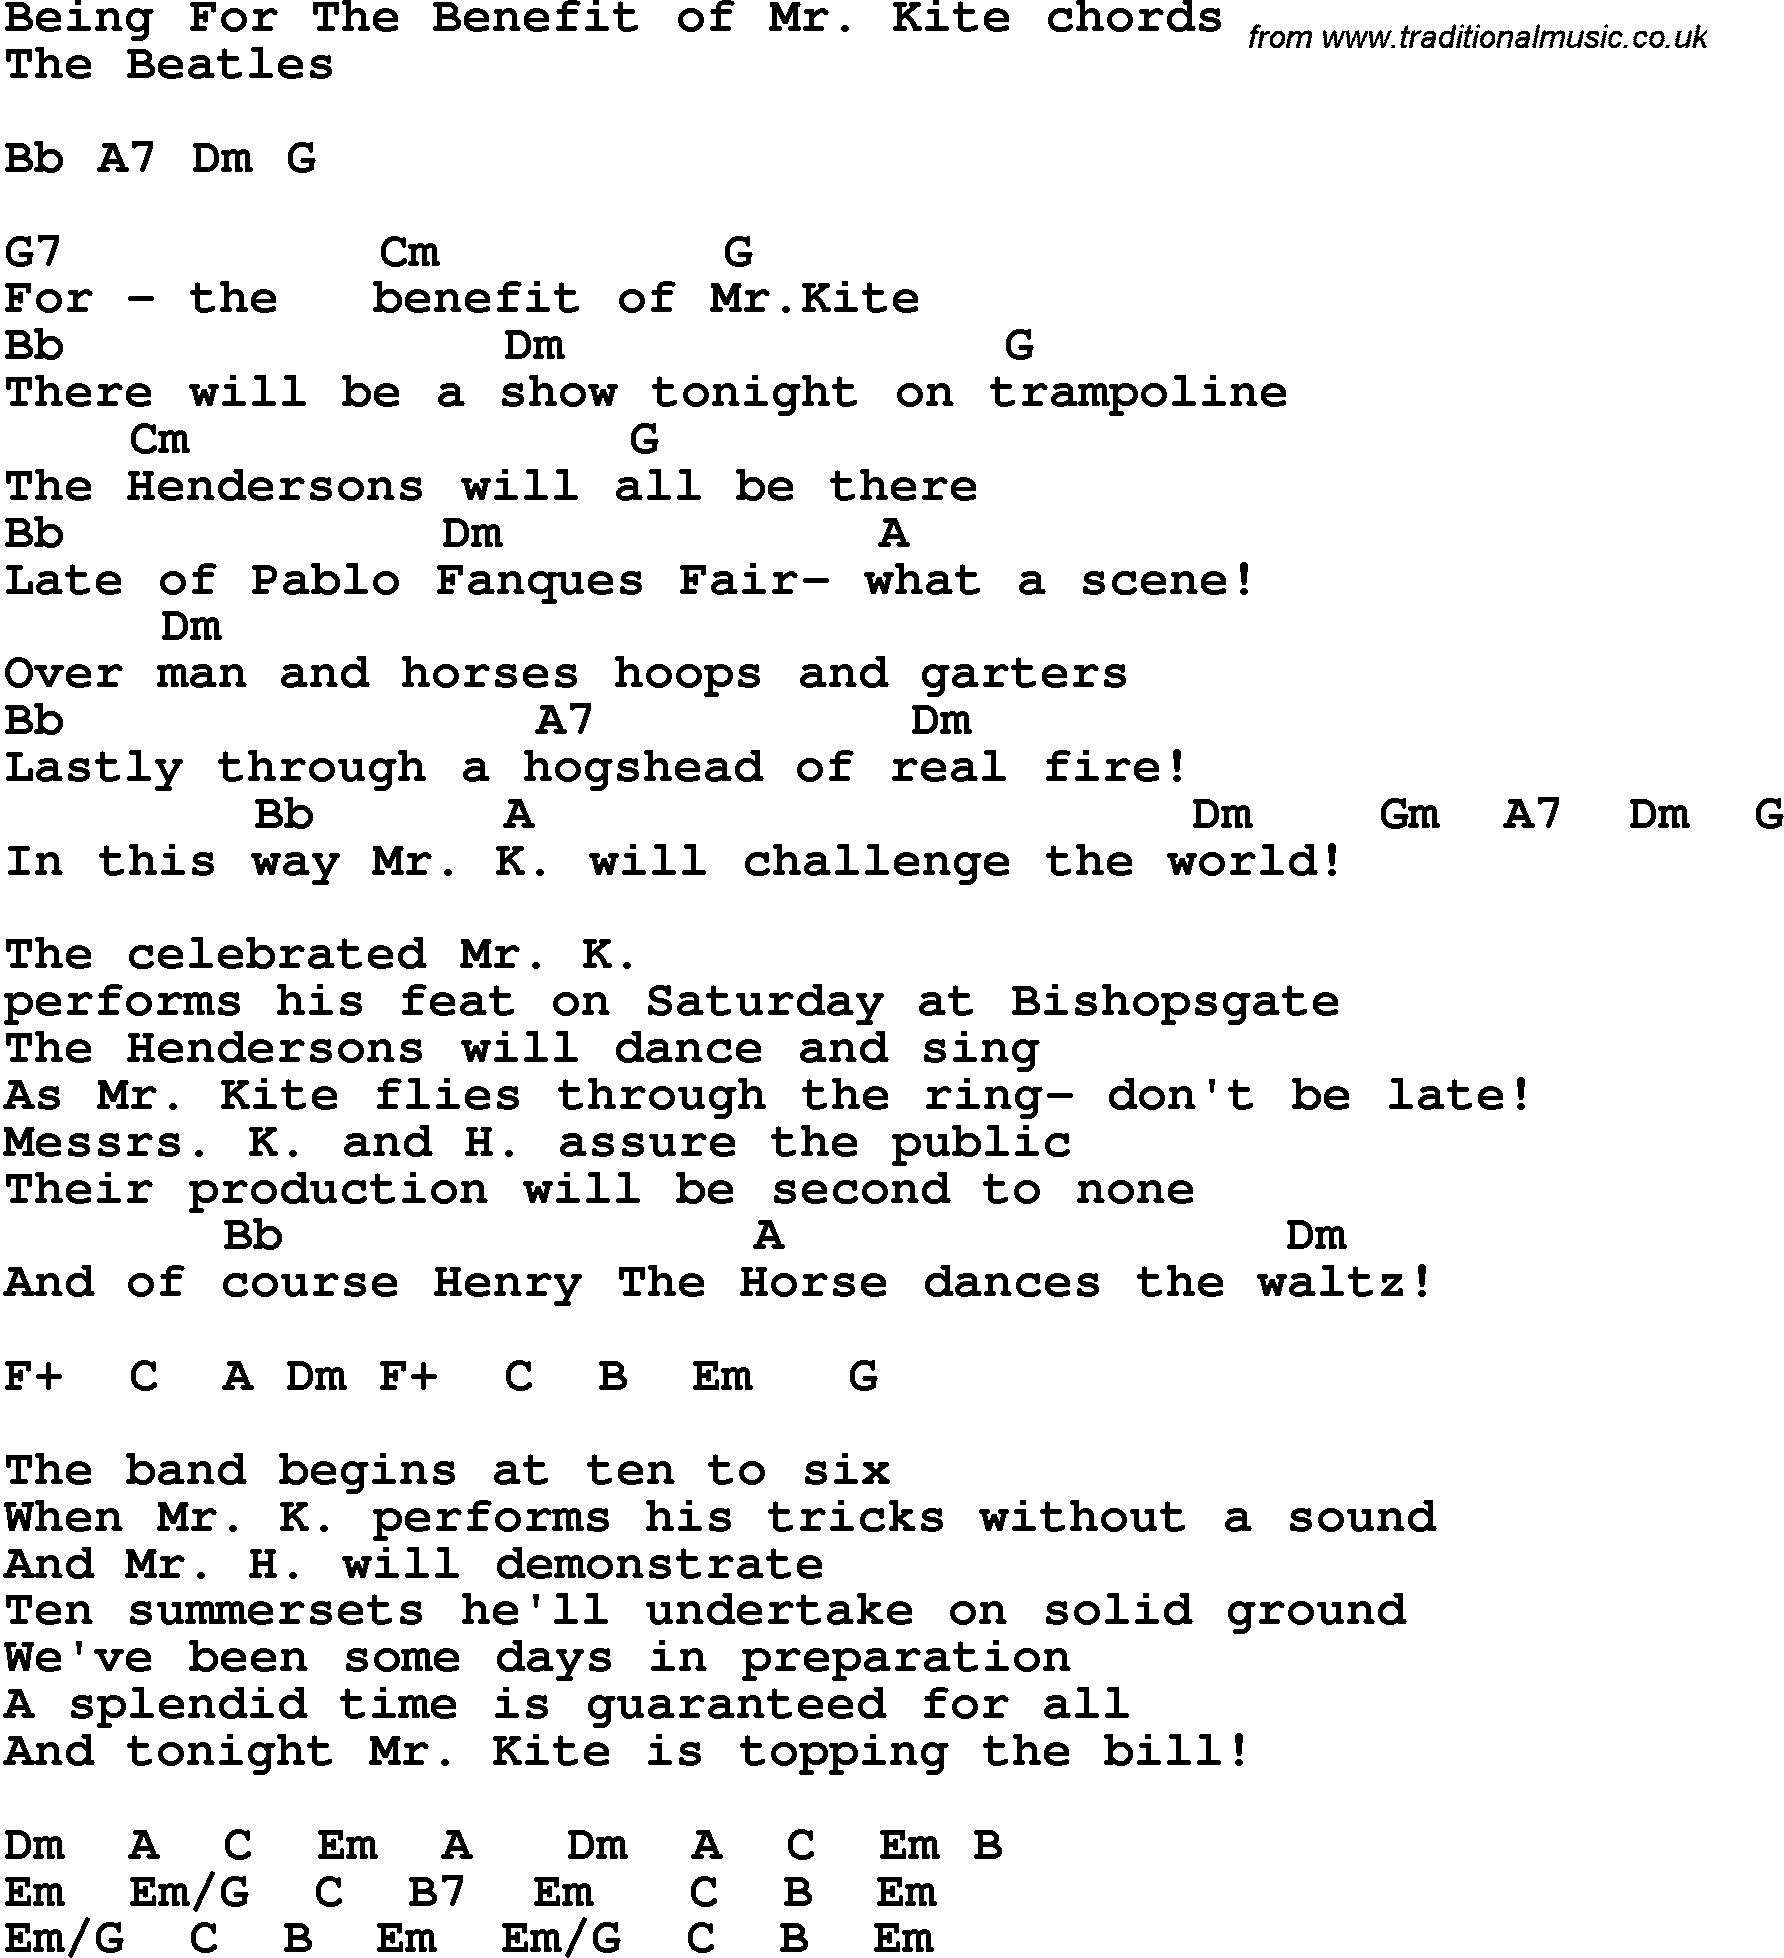 Song Lyrics with guitar chords for Being For The Benefit Of Mr Kite